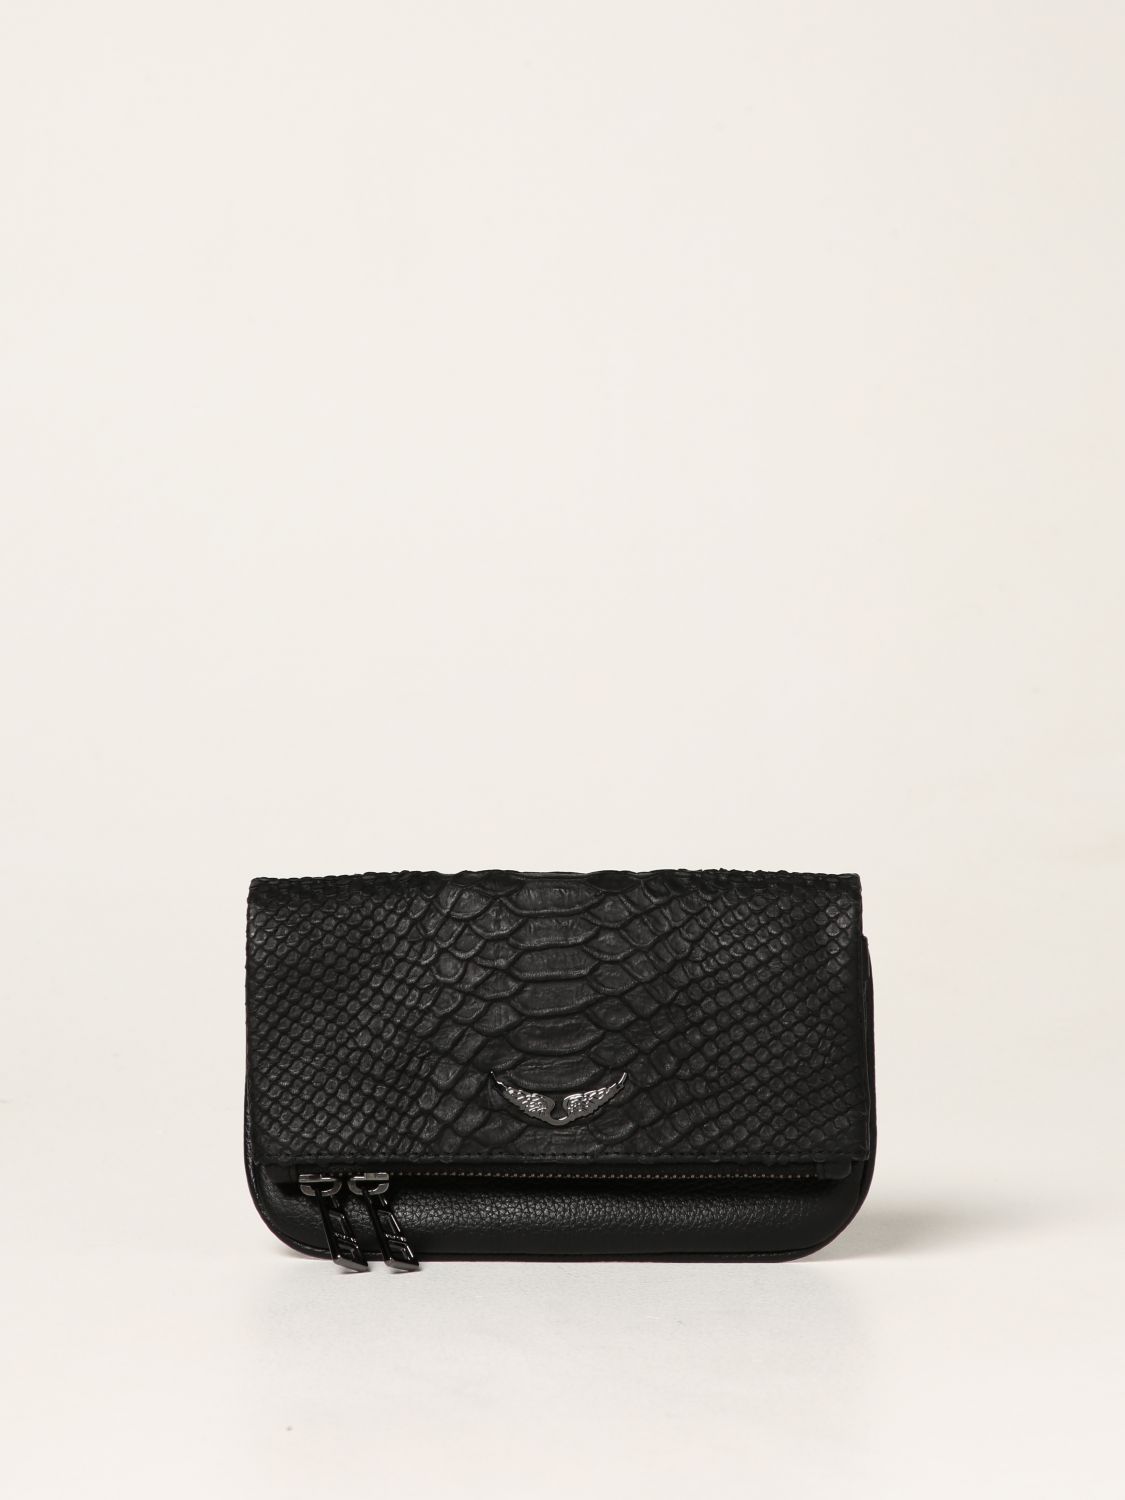 Zadig & Voltaire Bag In Leather With Python Print In Black | ModeSens